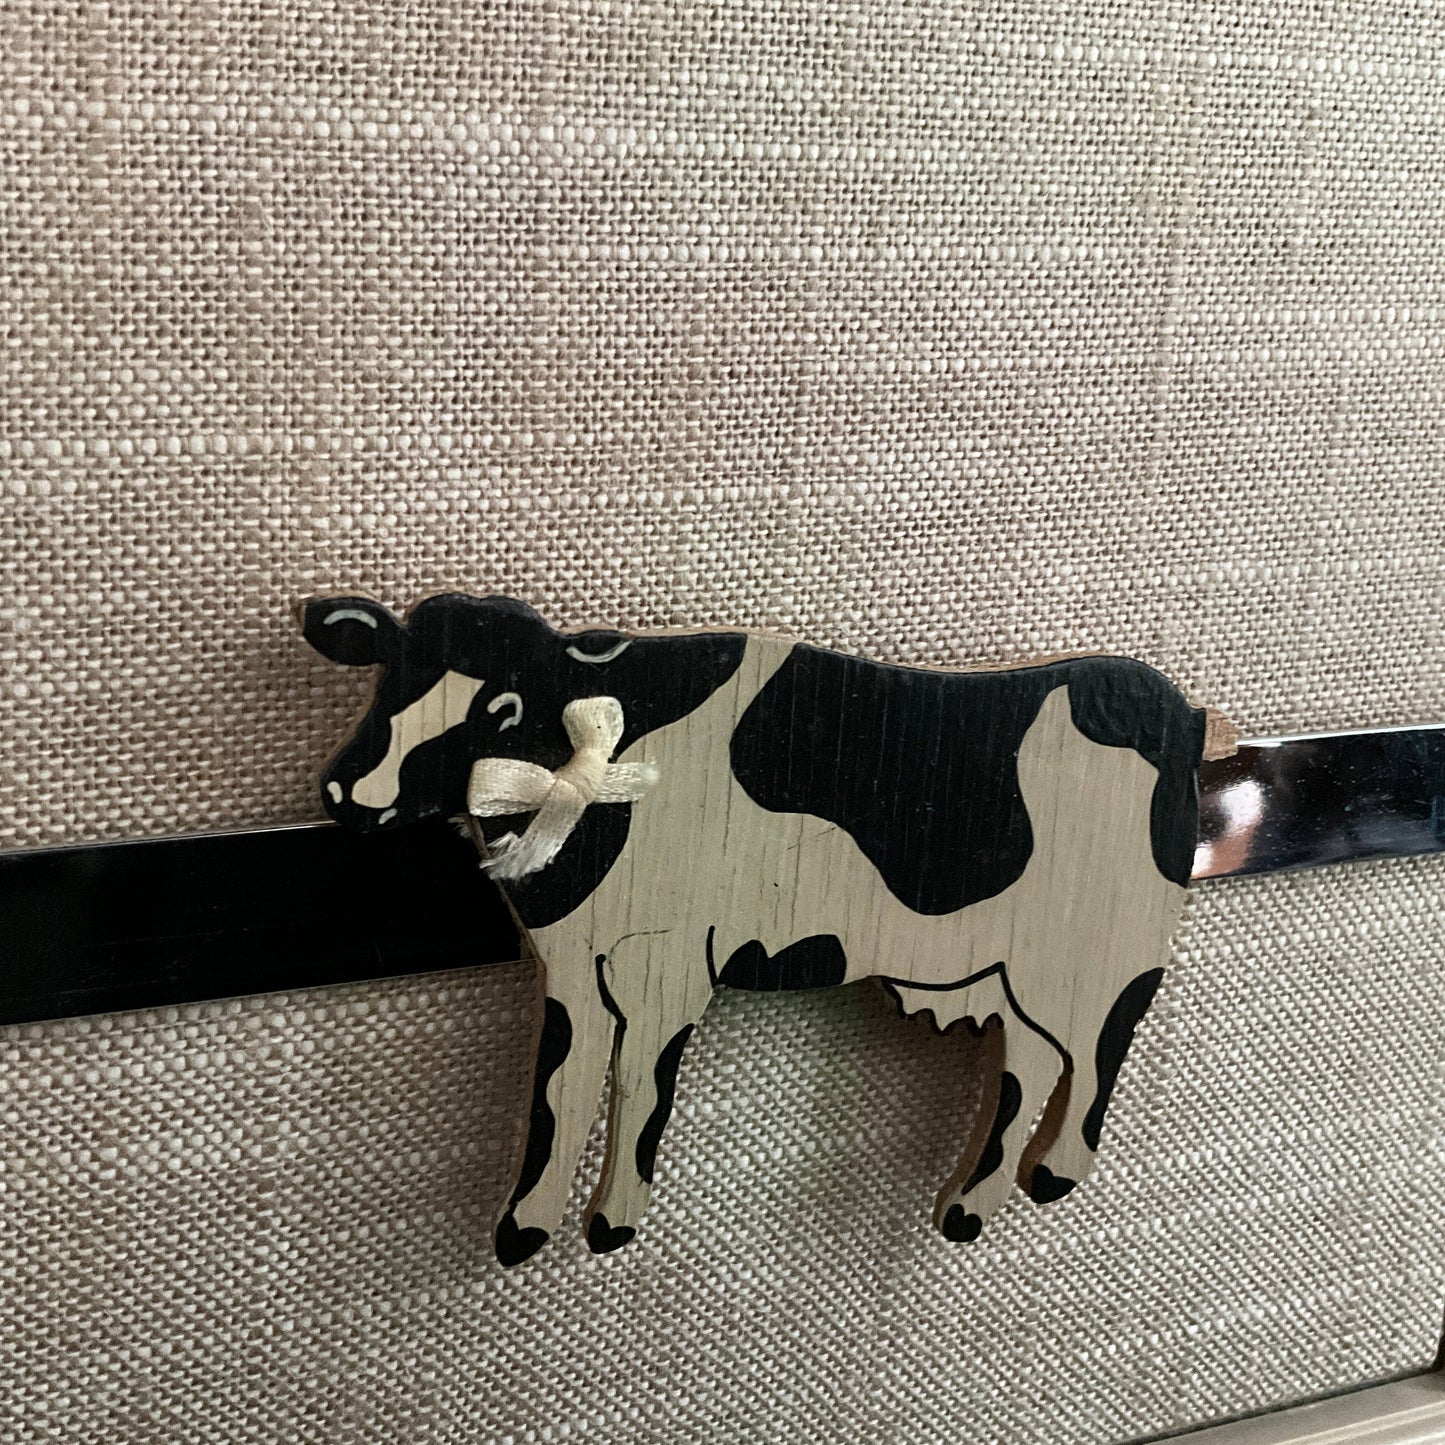 Wooden Cow magnets st of 2 vintage kitchen collectible refrigerator magnets